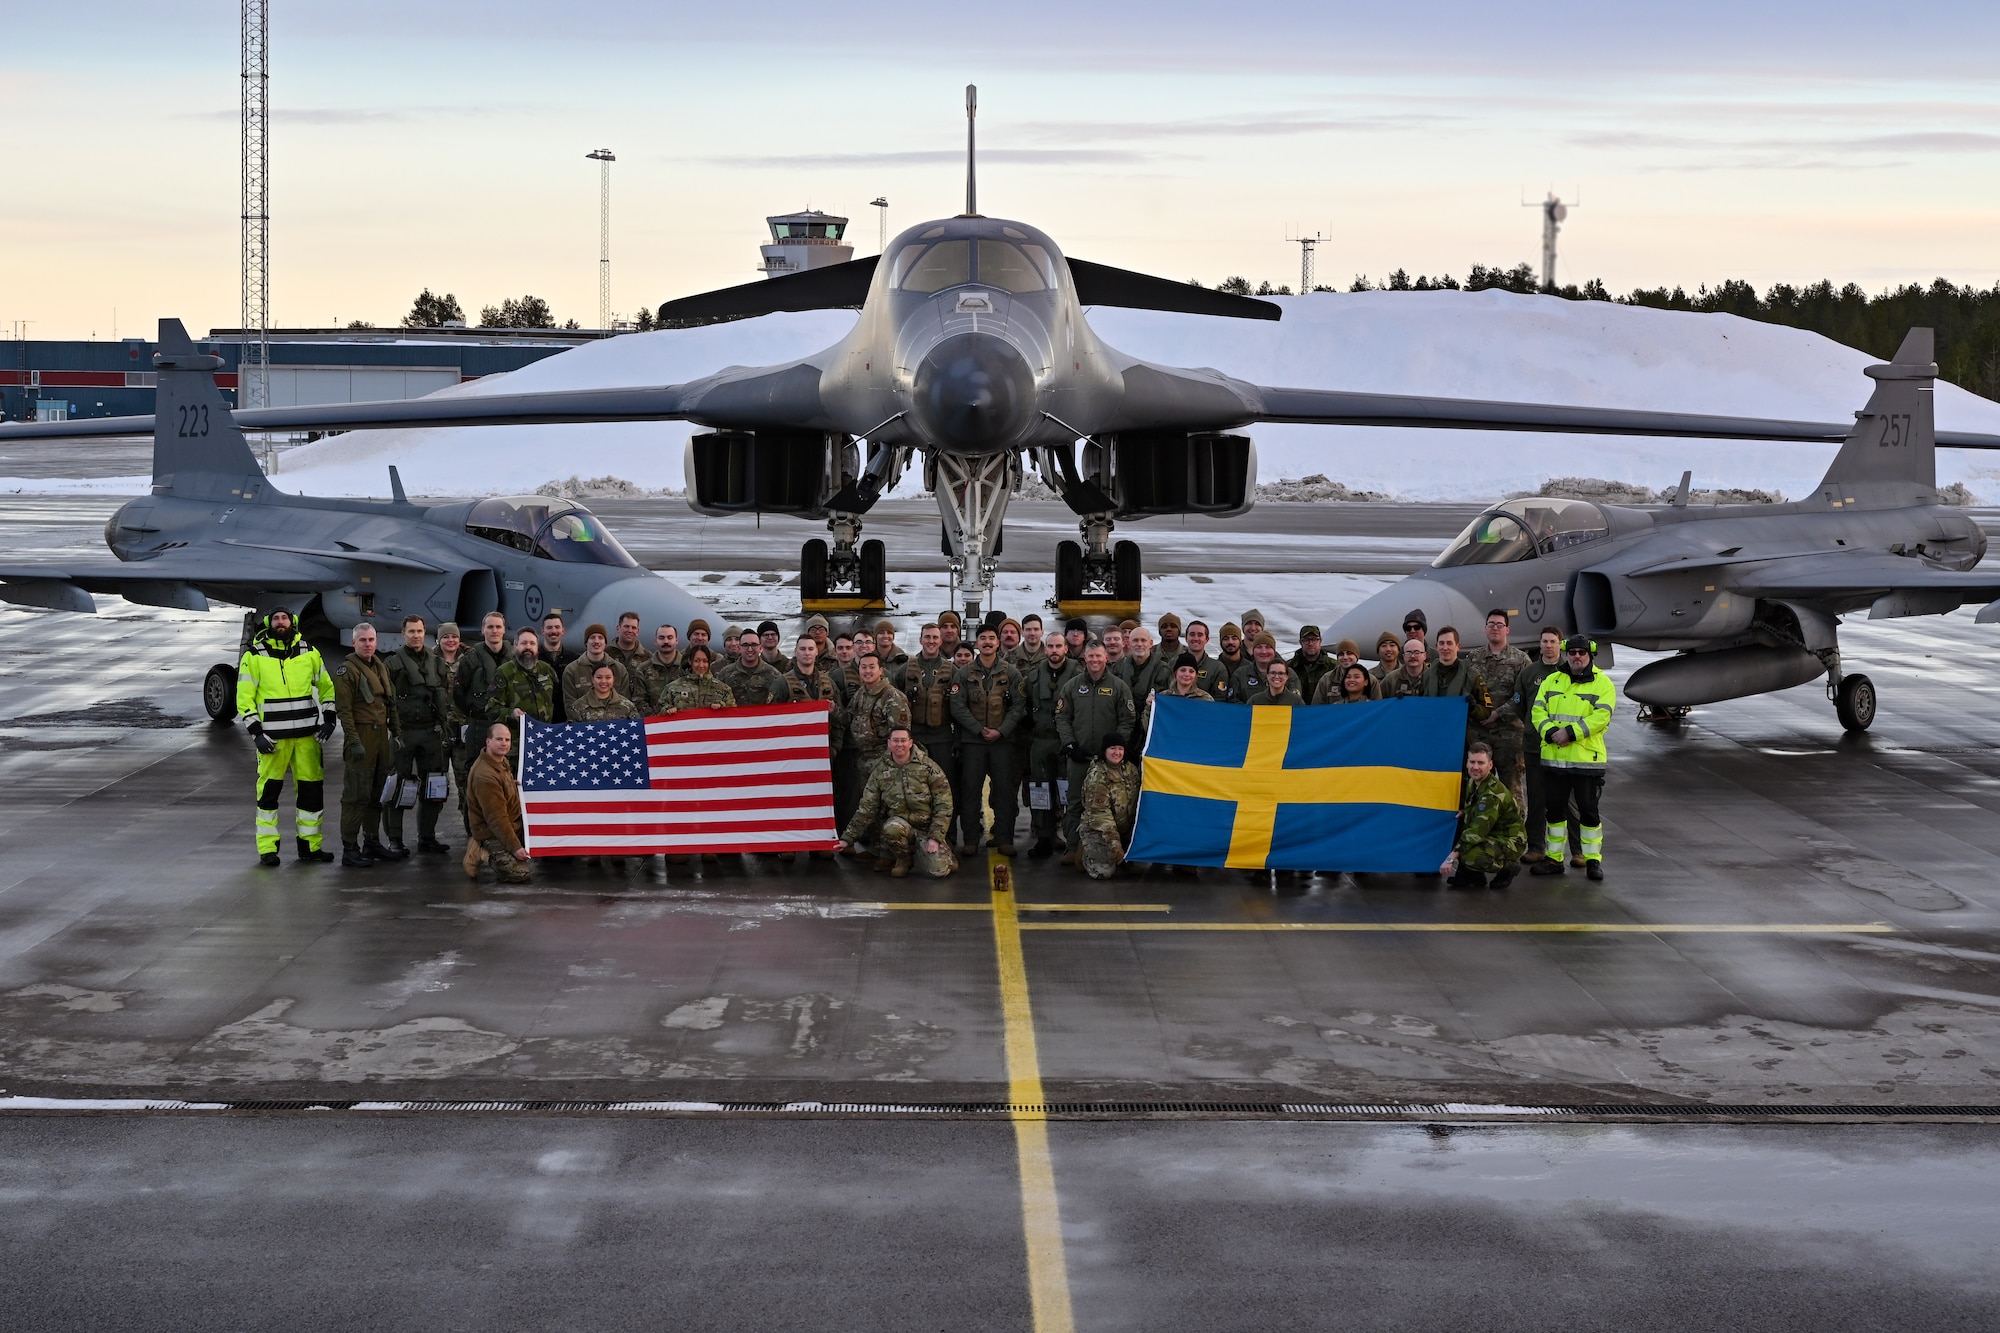 U.S. Air Force Airmen assigned to the 28th Bomb Wing, Ellsworth Air Force Base, South Dakota, pose for a group photo alongside Swedish military personnel in front of a B-1B Lancer and two Saab JAS 39 Gripens at Luleå-Kallax Air Base, Sweden, Feb. 26, 2024, during Bomber Task Force 24-2. These BTF missions are representative of the U.S.' extended deterrent commitment to its Allies and partners and enhance regional security. BTF operations provide U.S. leaders with strategic options to assure Allies and partners, while deterring potential adversary aggression across the globe. (U.S. Air Force photo by Staff Sgt. Jake Jacobsen)